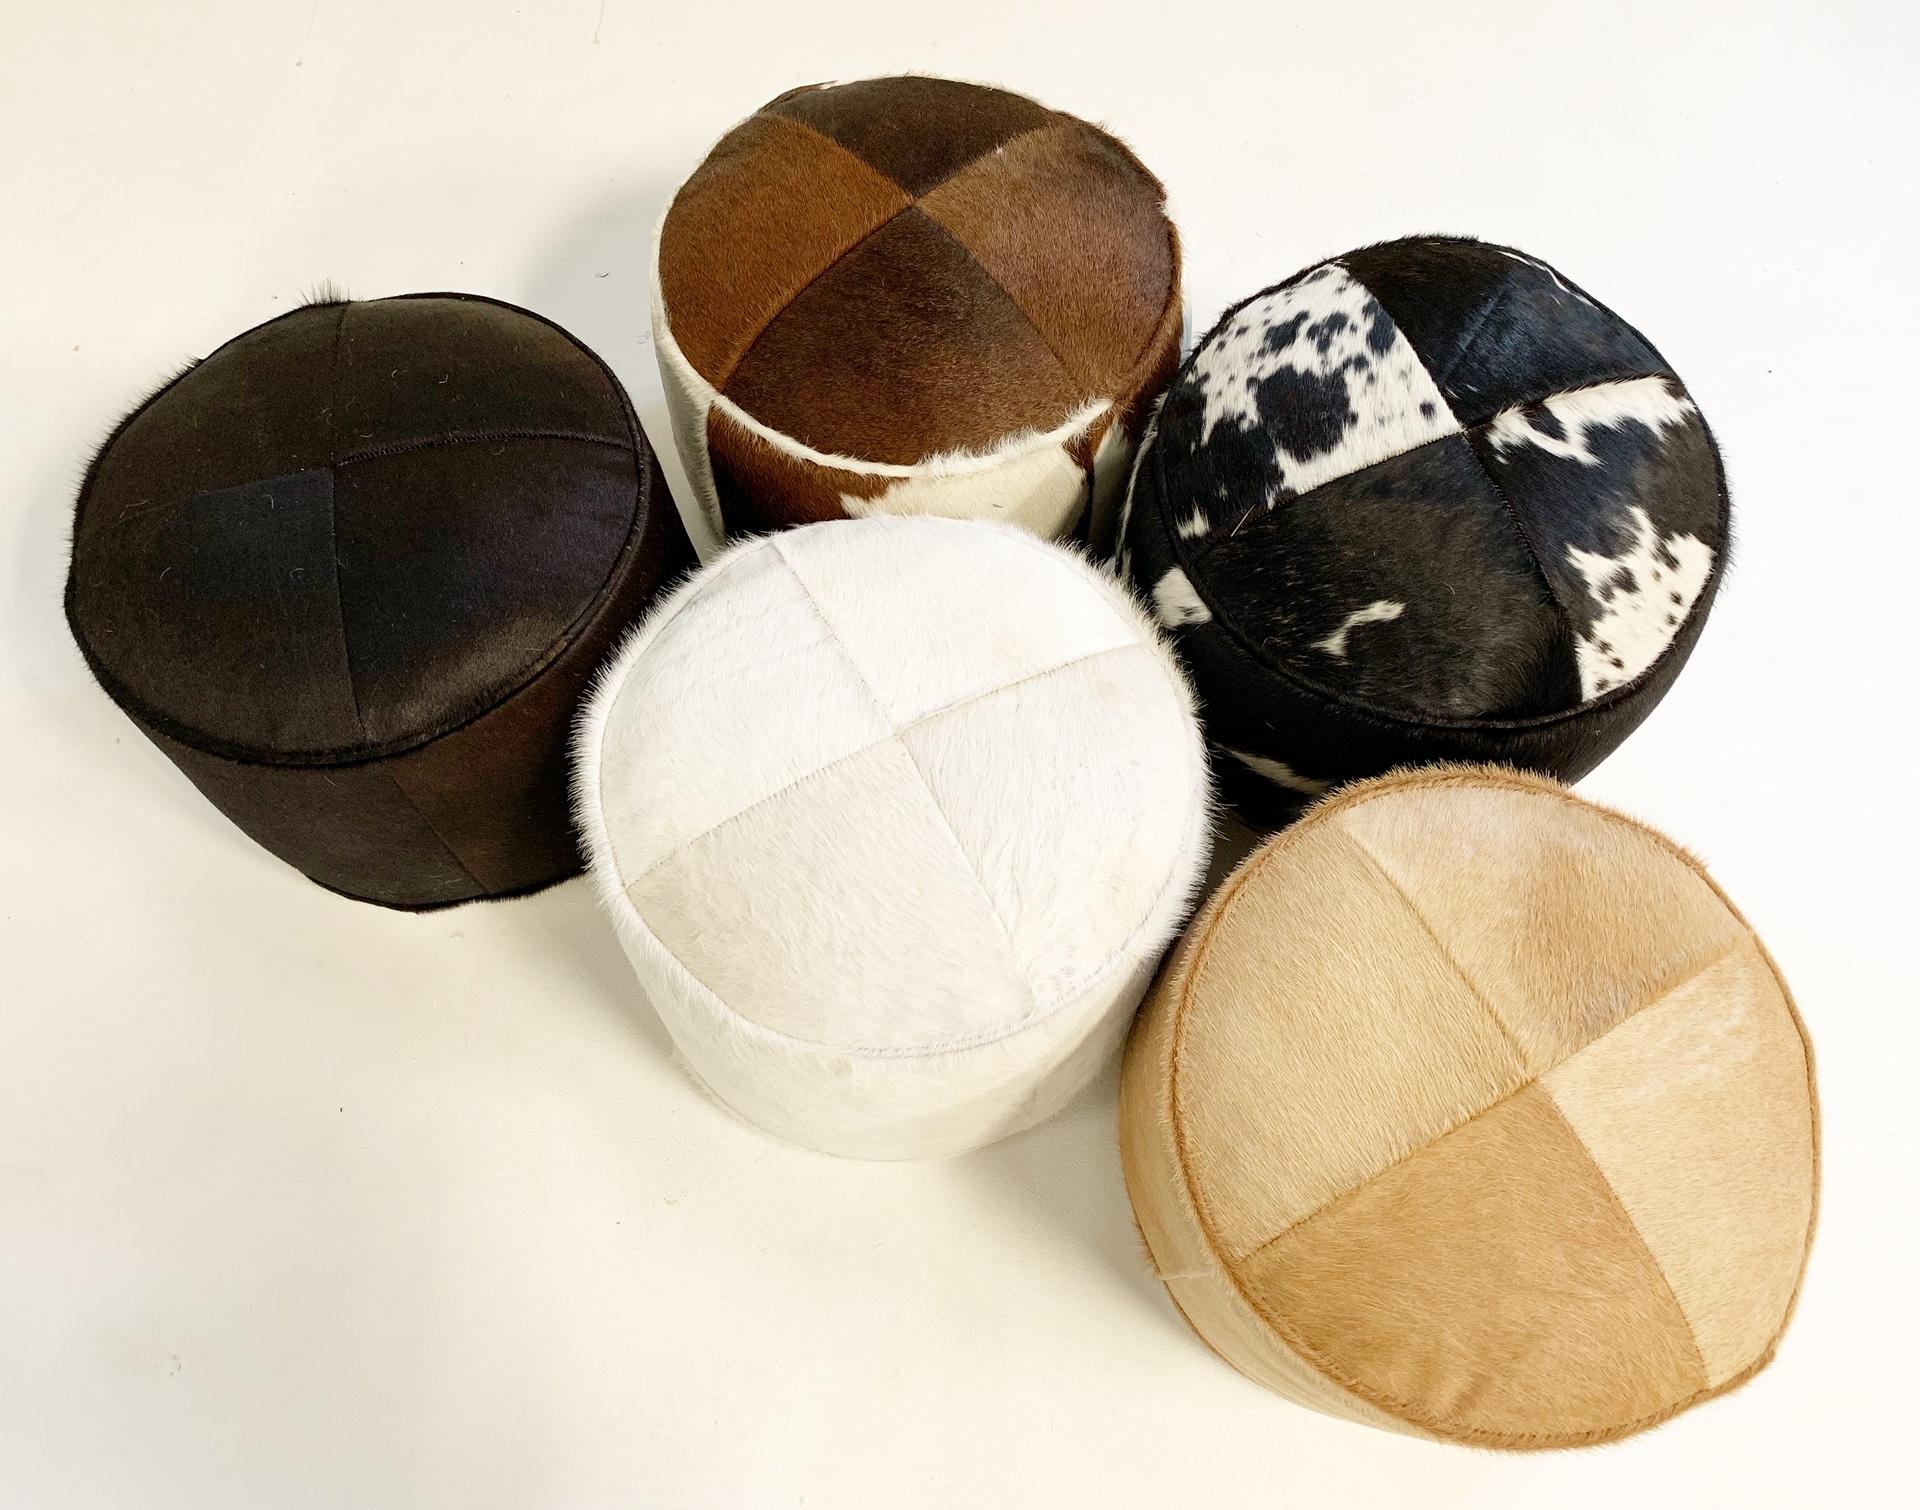 Our luxurious cowhide pouf ottomans are handcrafted from our beautiful Forsyth Brazilian cowhides. The most beautiful cowhides are selected hand cut, hand stitched and hand stuffed. Down feathers fill each pouf, 12 pounds to be exact, and each is